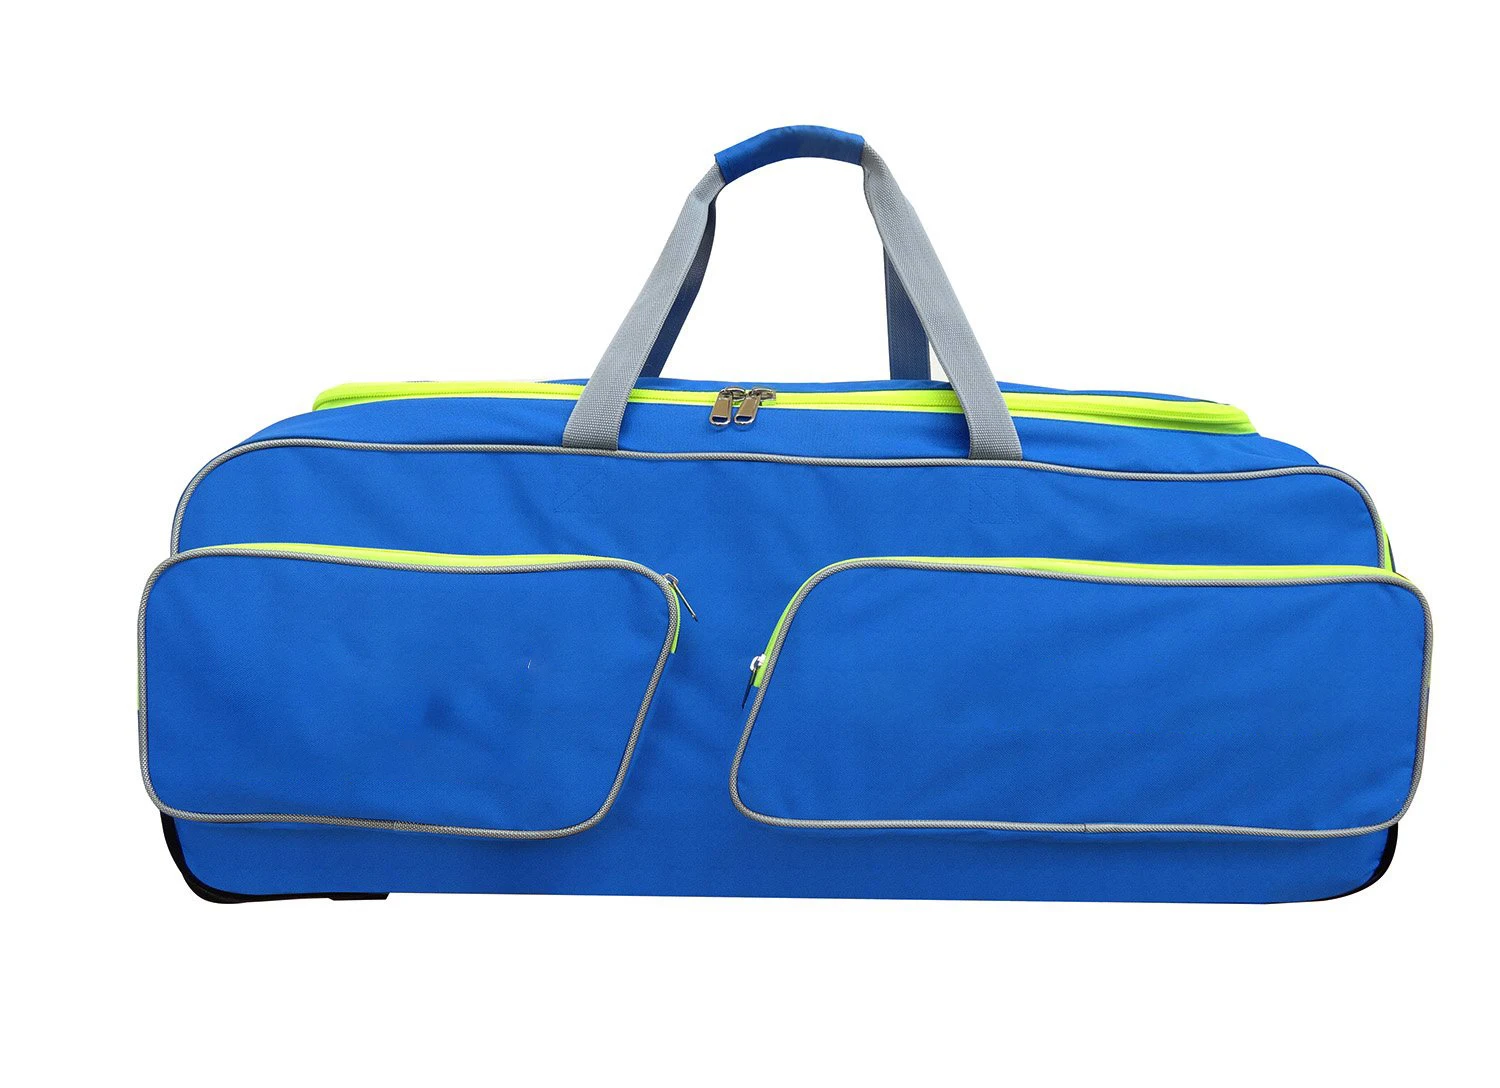 Private Label Newest Stylish Heavy Duty Sports Kit Waterproof Cricket Kit Bag With Custom Size by Canleo International